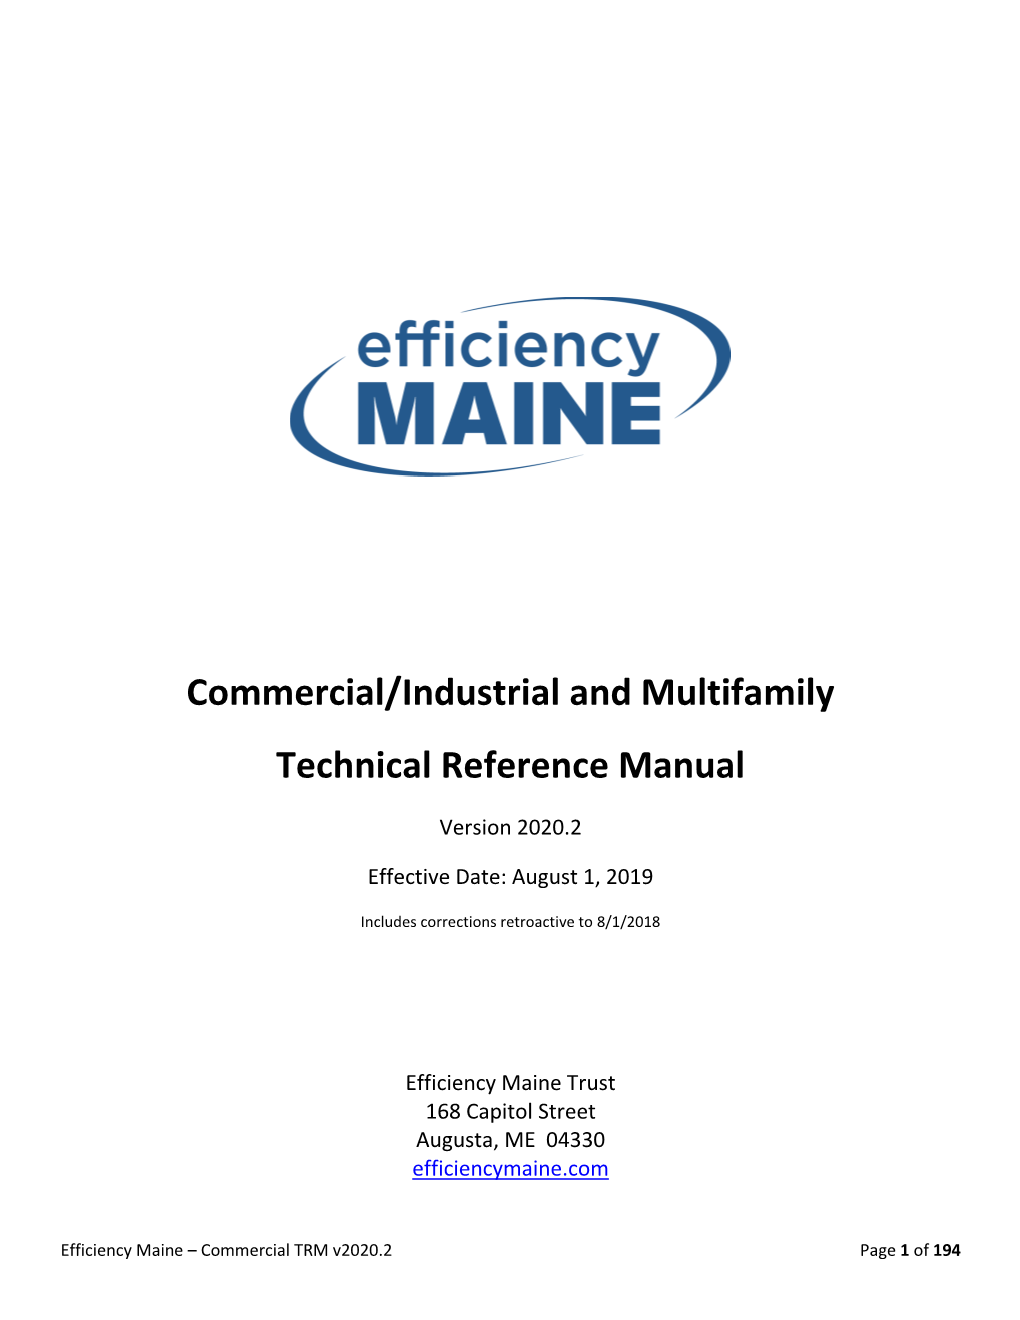 Commercial/Industrial and Multifamily Technical Reference Manual